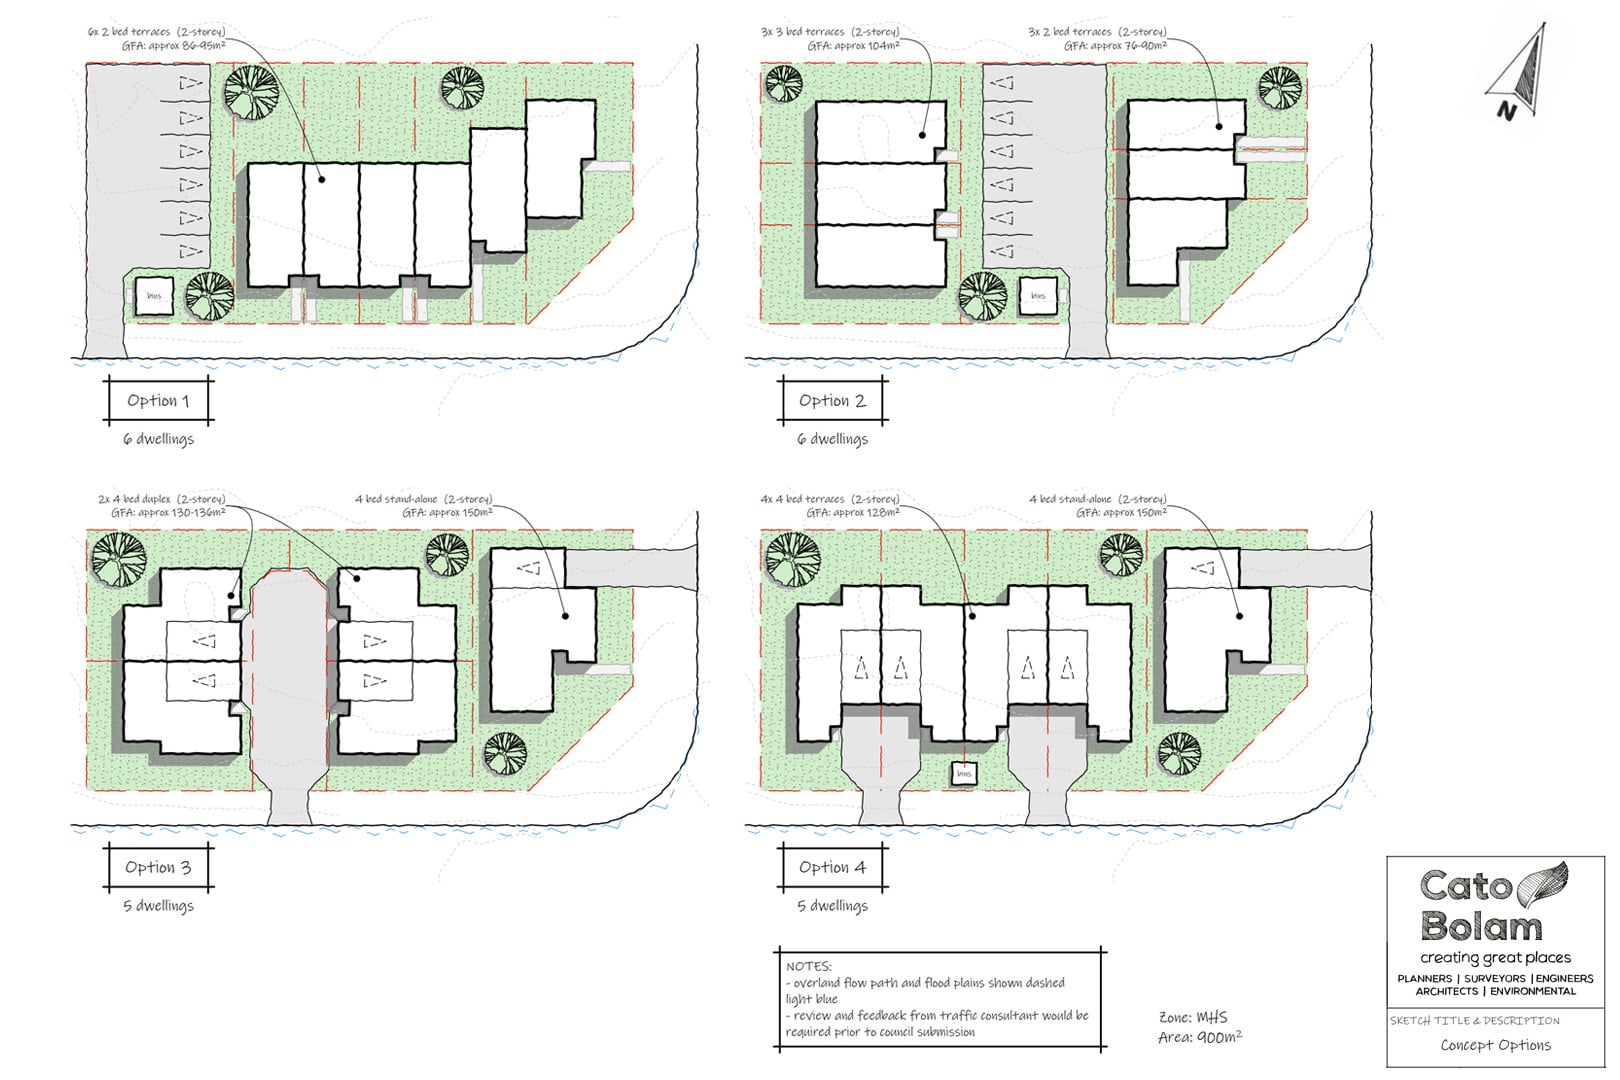 5 Scotts Road MHS - Property Development - The Importance of Initial Development Feasibility and Concept Option Analysis